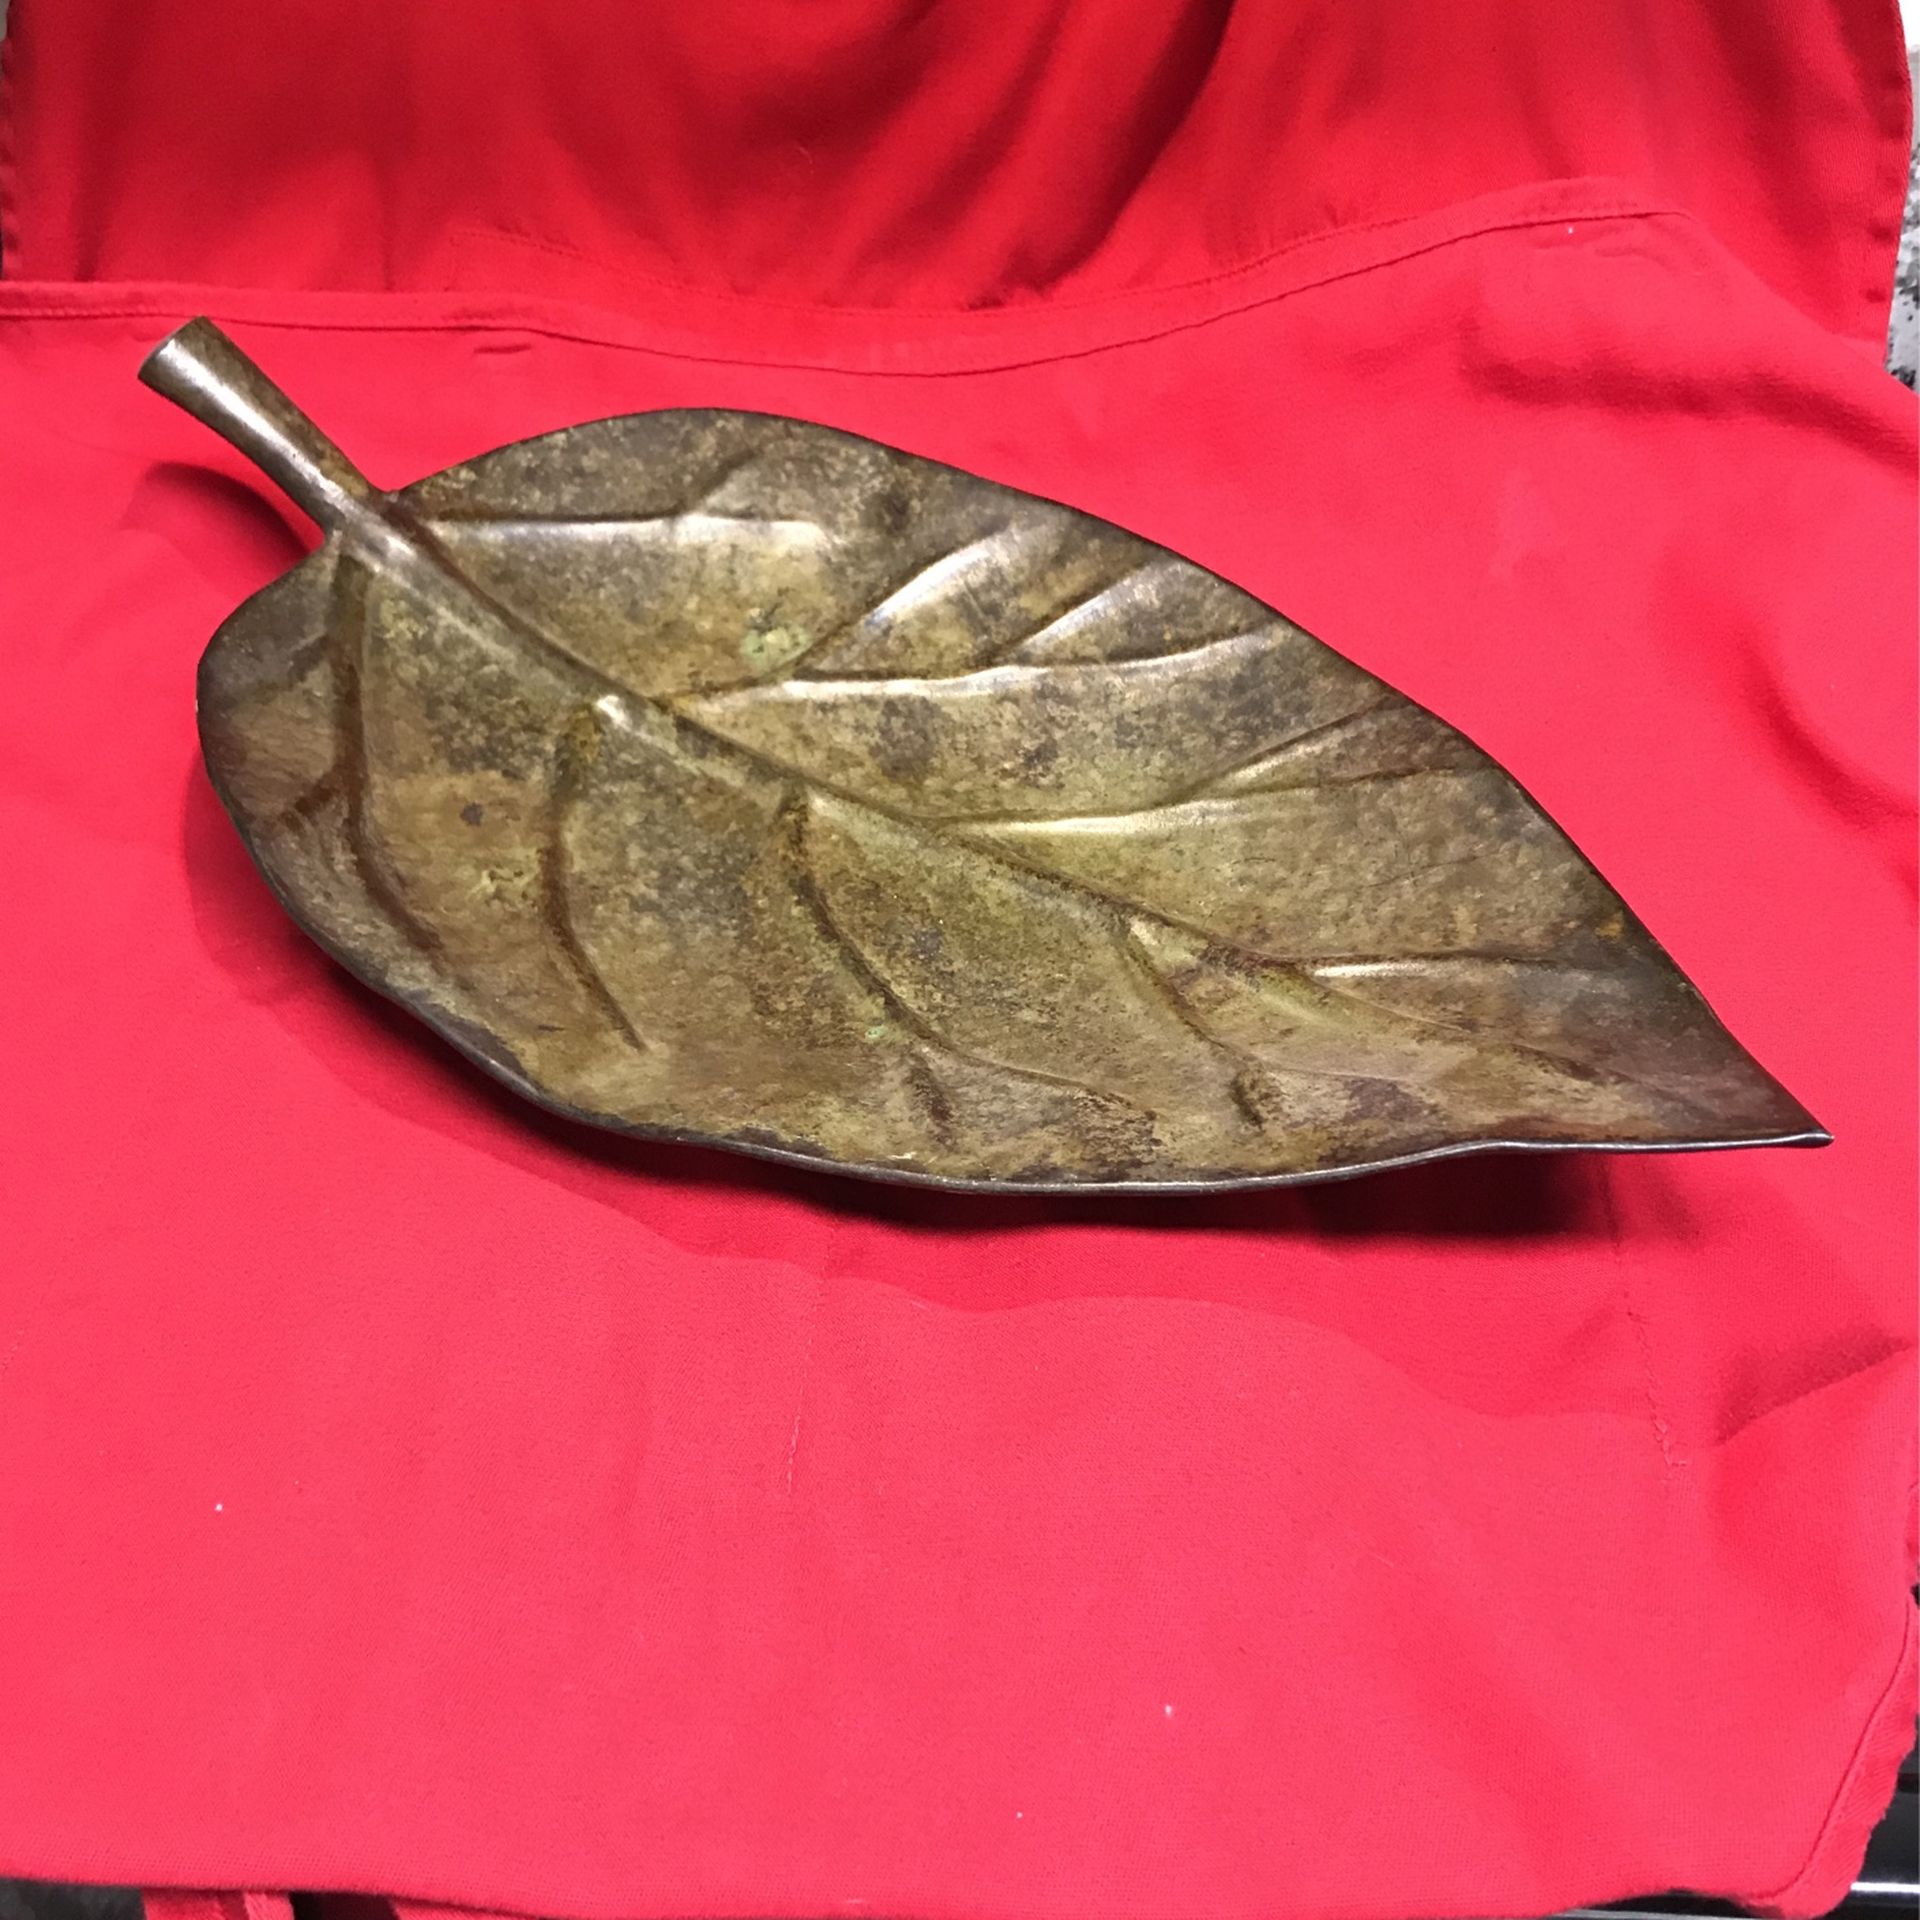 “ Just A Leaf To Sit On Coffee Table Or Anywhere!